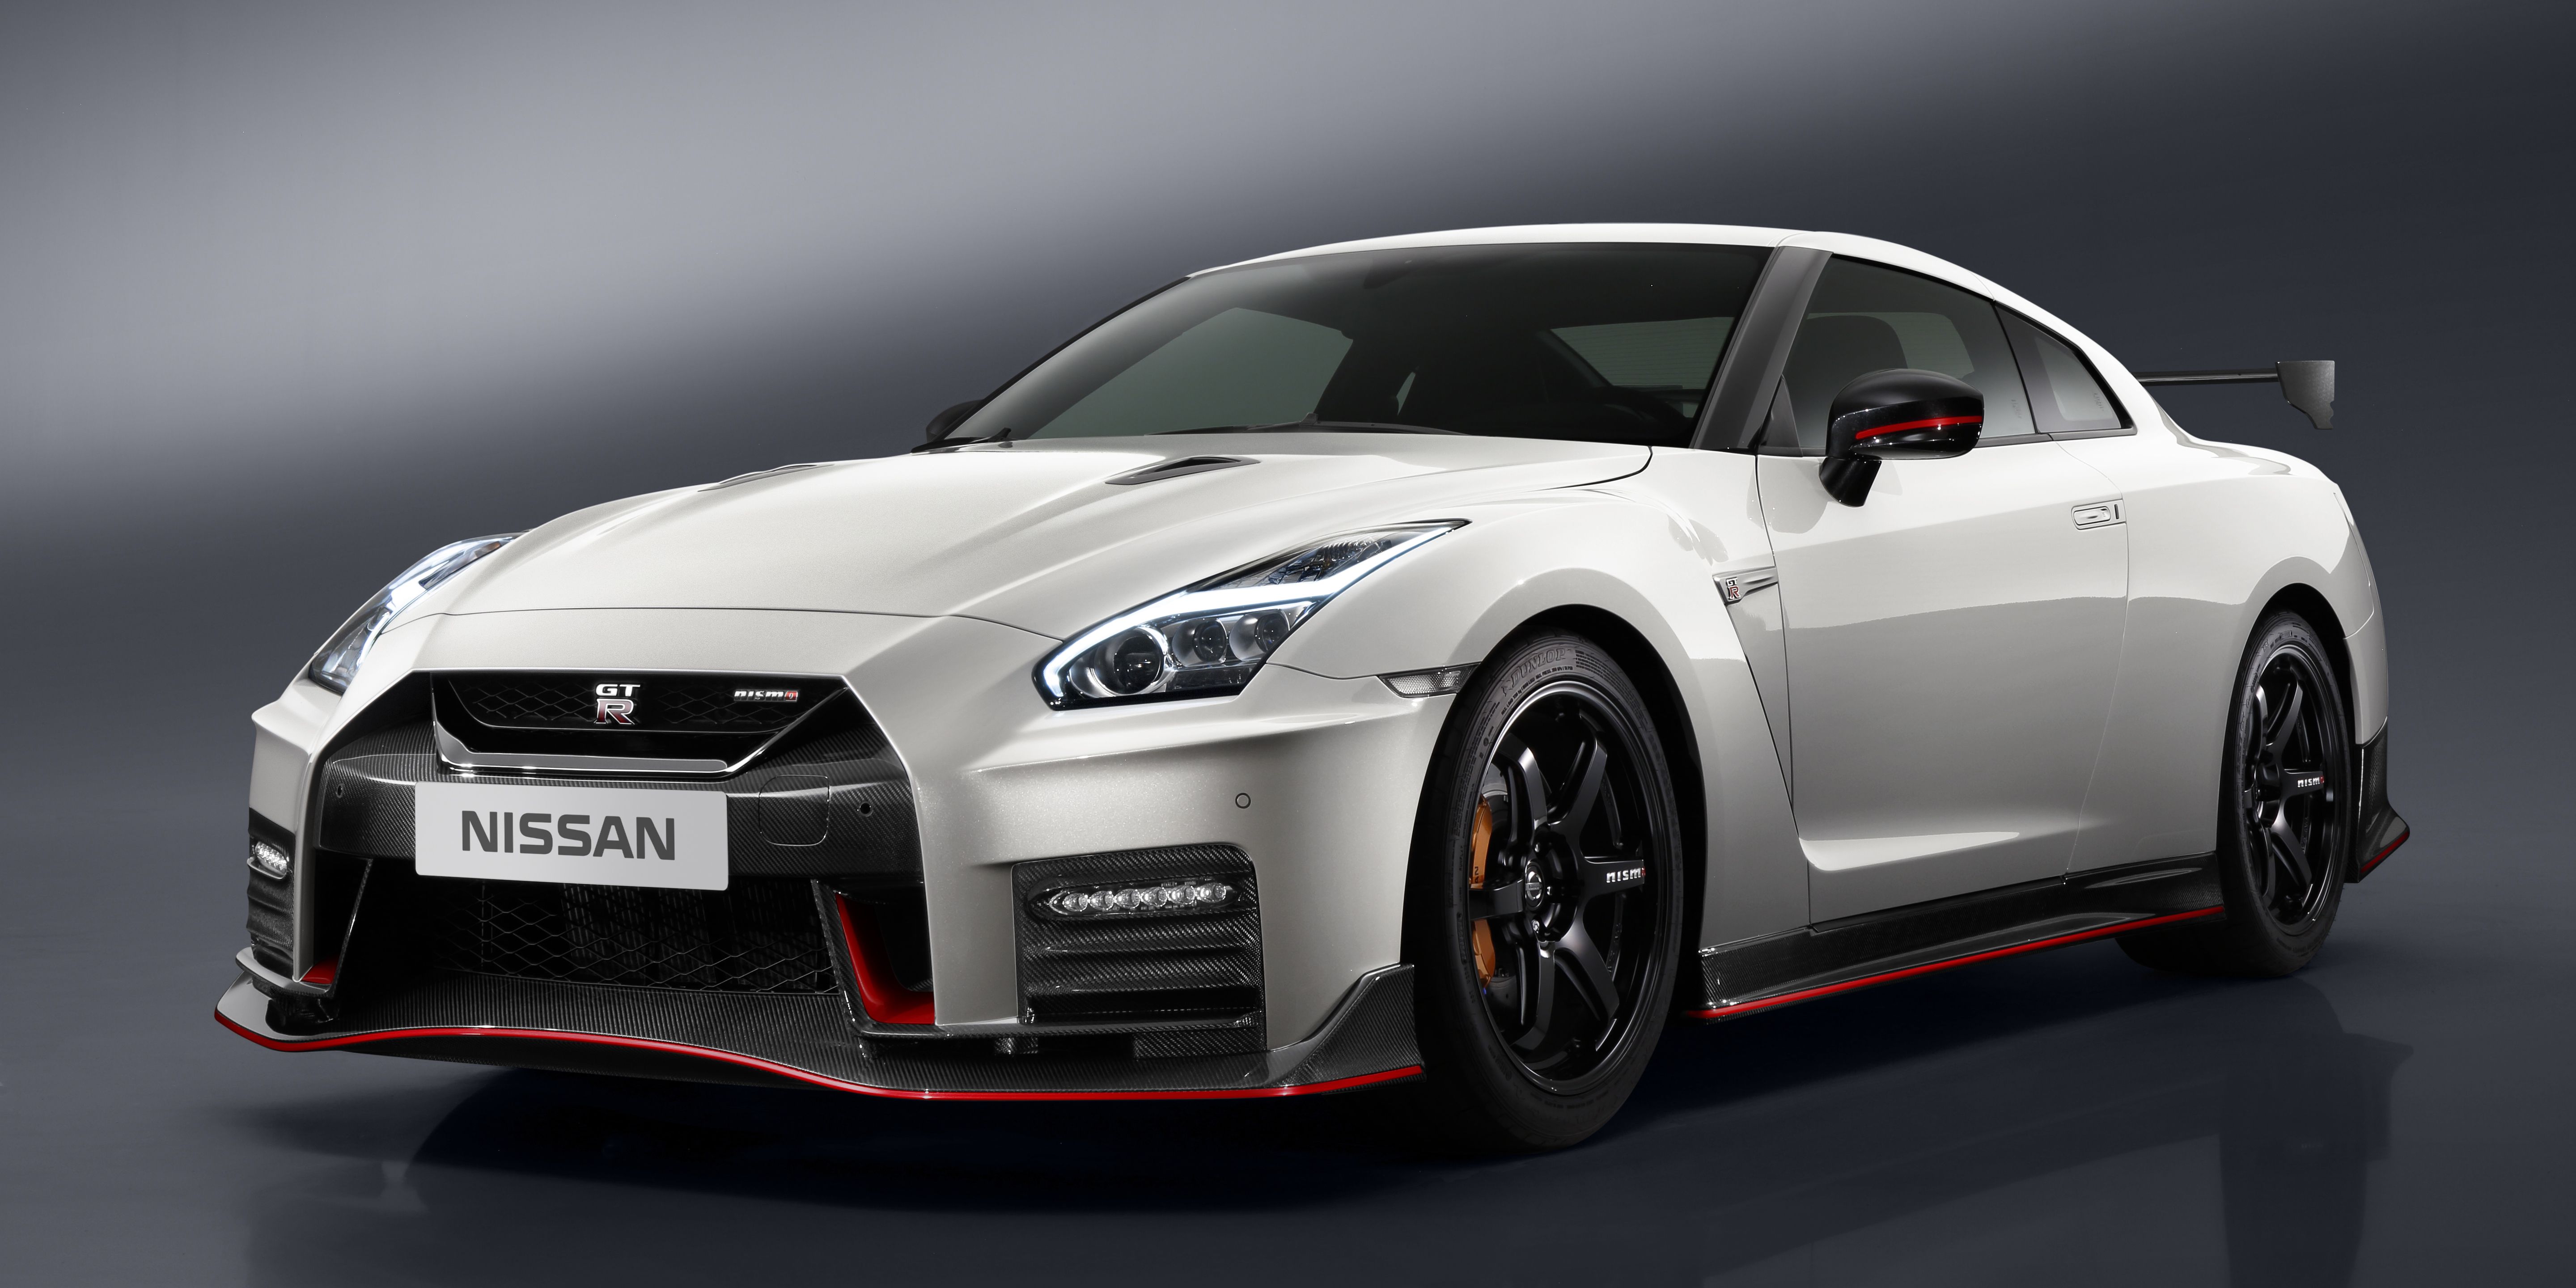 2017 GT-R NISMO - Specs and Photos of the GTR NISMO